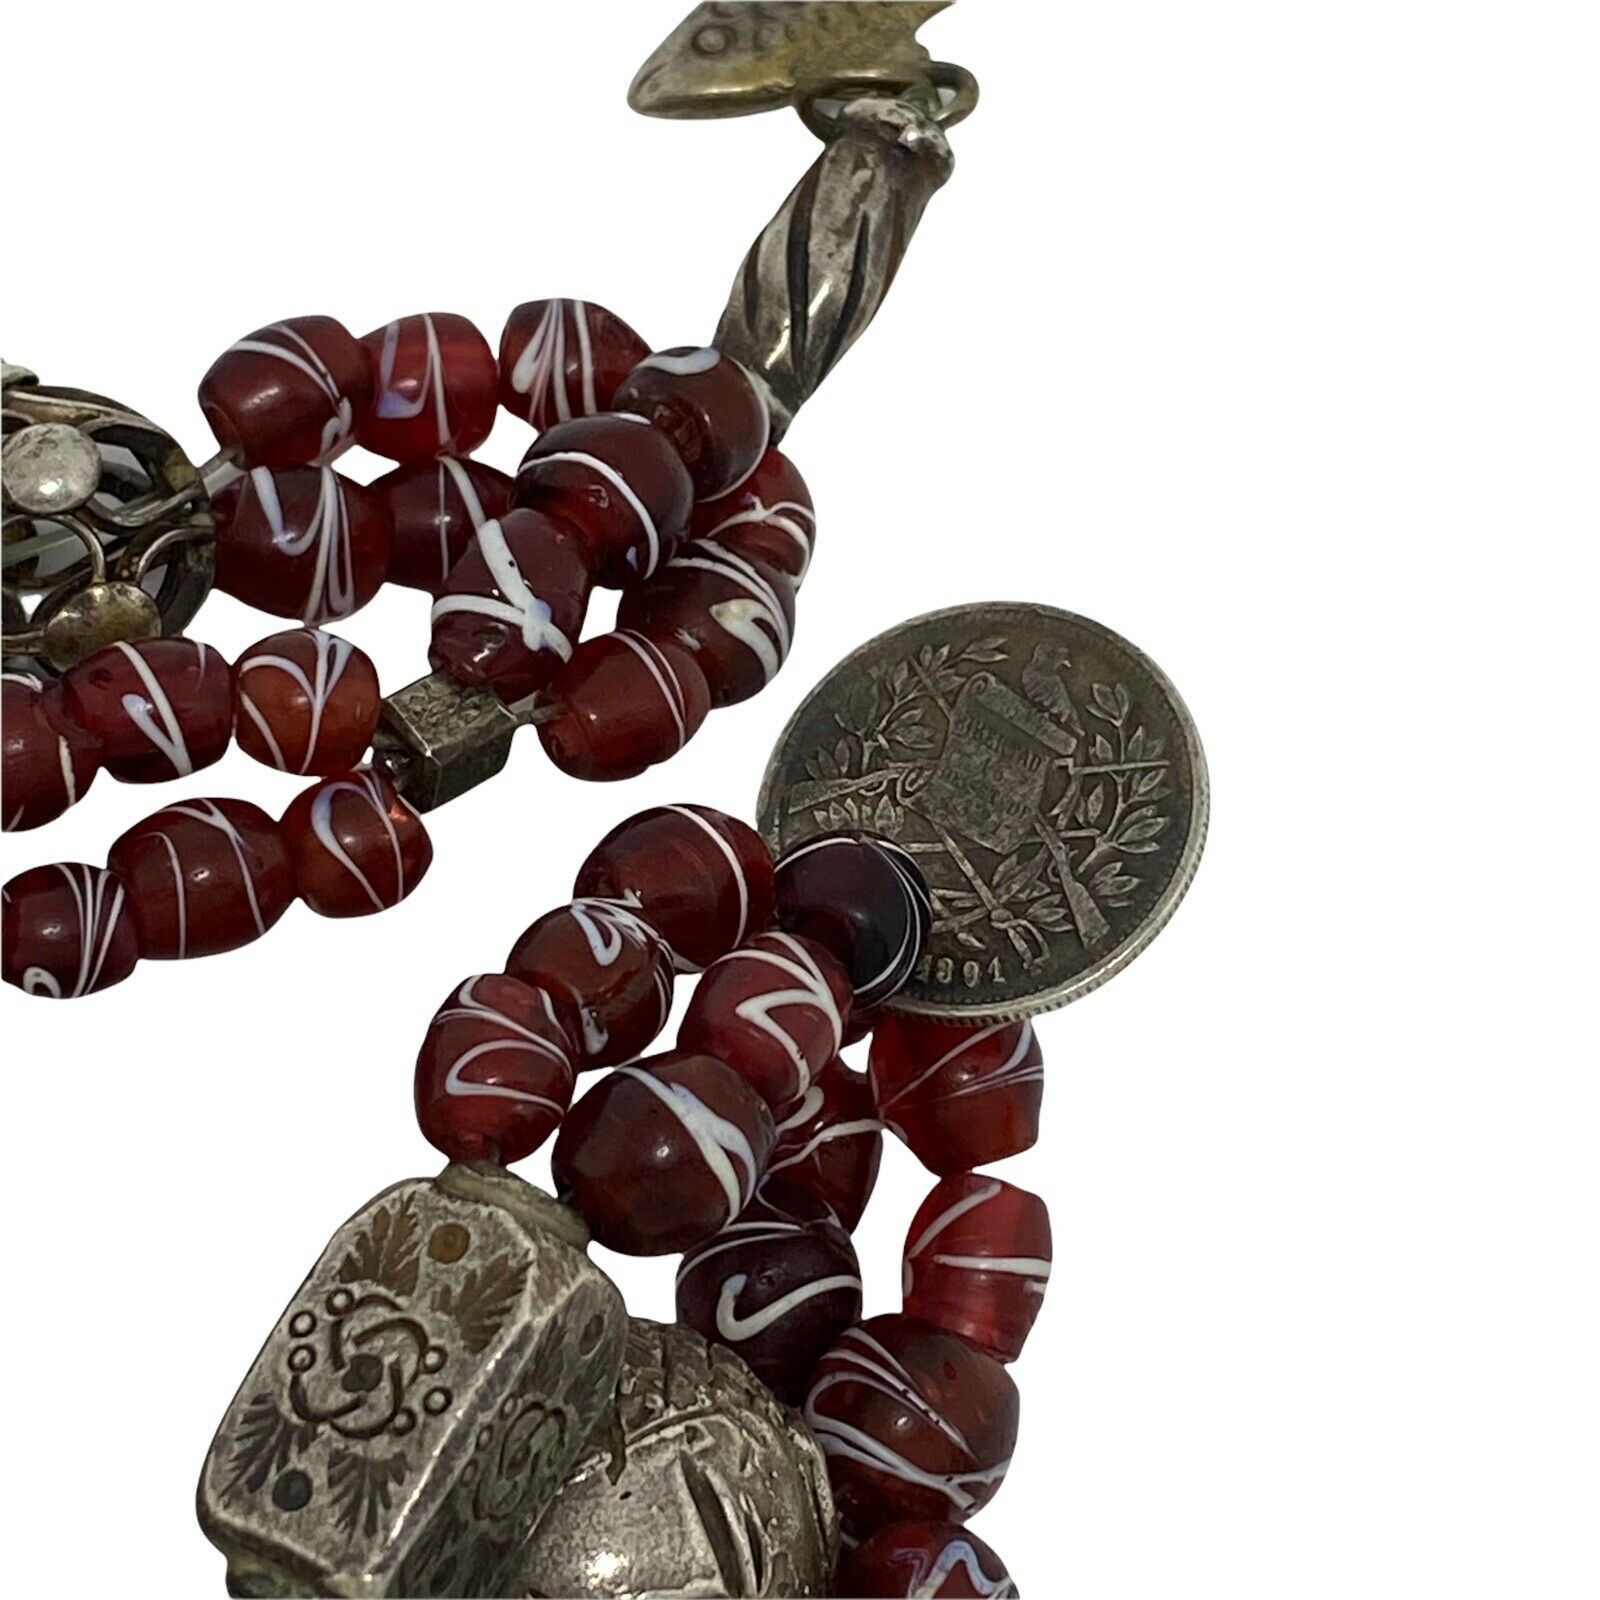 Antique_Guatemalan_Chachal_S.Silver_Necklace_1800’s_Coins_Red_Glass_Beads_Cross_9.jpg (221.4 KB)